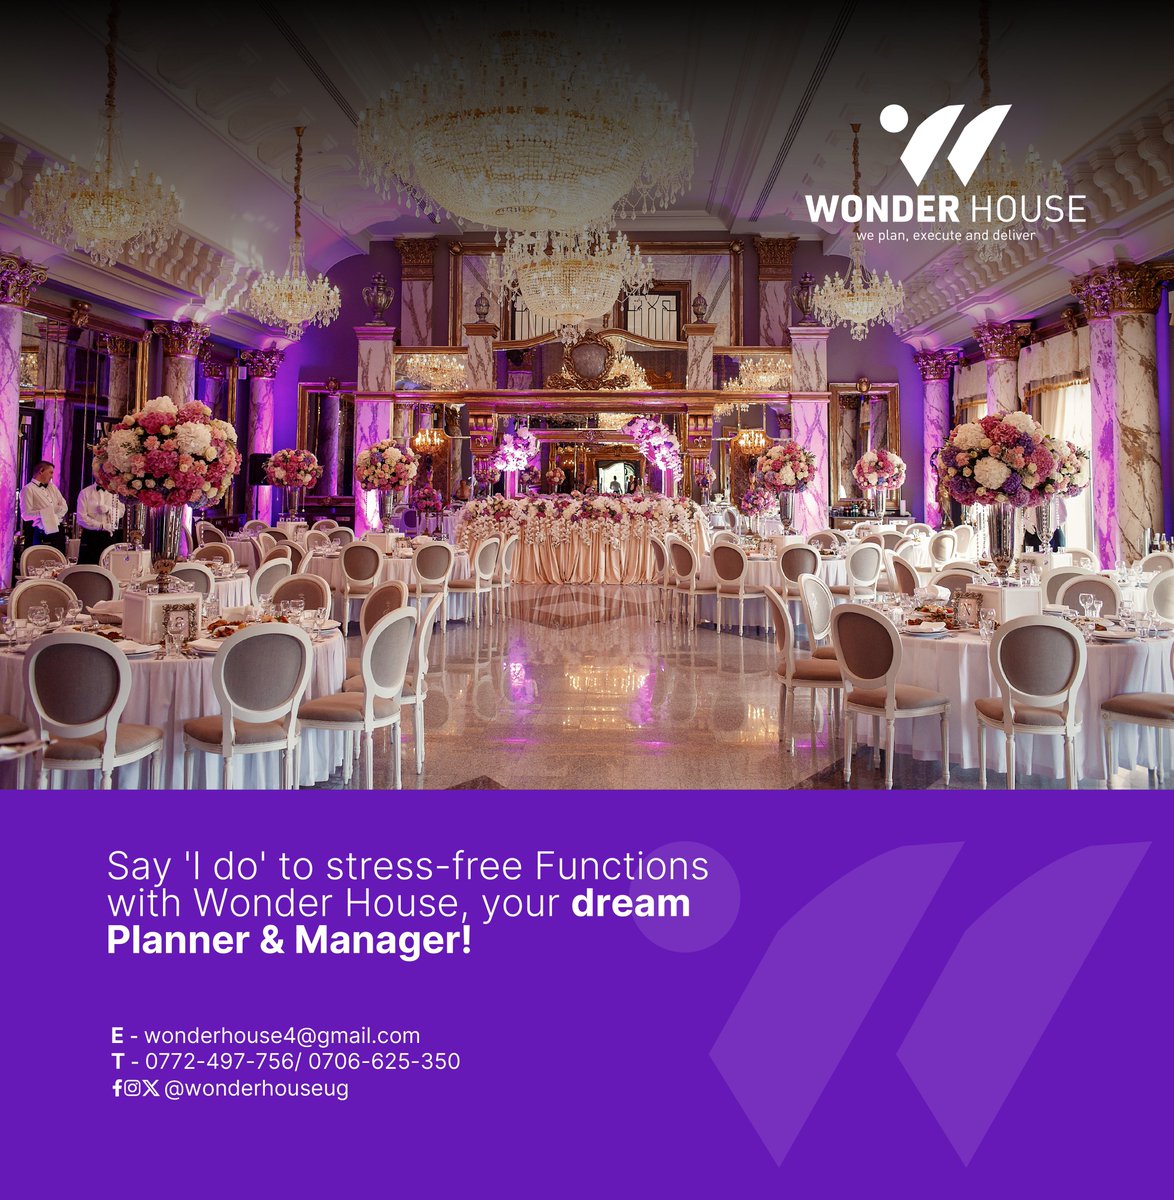 Leave the details to us!😍
@wonderhouseug ensures your special moments are perfectly planned and executed.

☎️ 0772497756 | 0706625350

#WonderHouse #weddings #weddingmanagement #eventmanagement #eventplanner #weddingplanner #weddingplanning